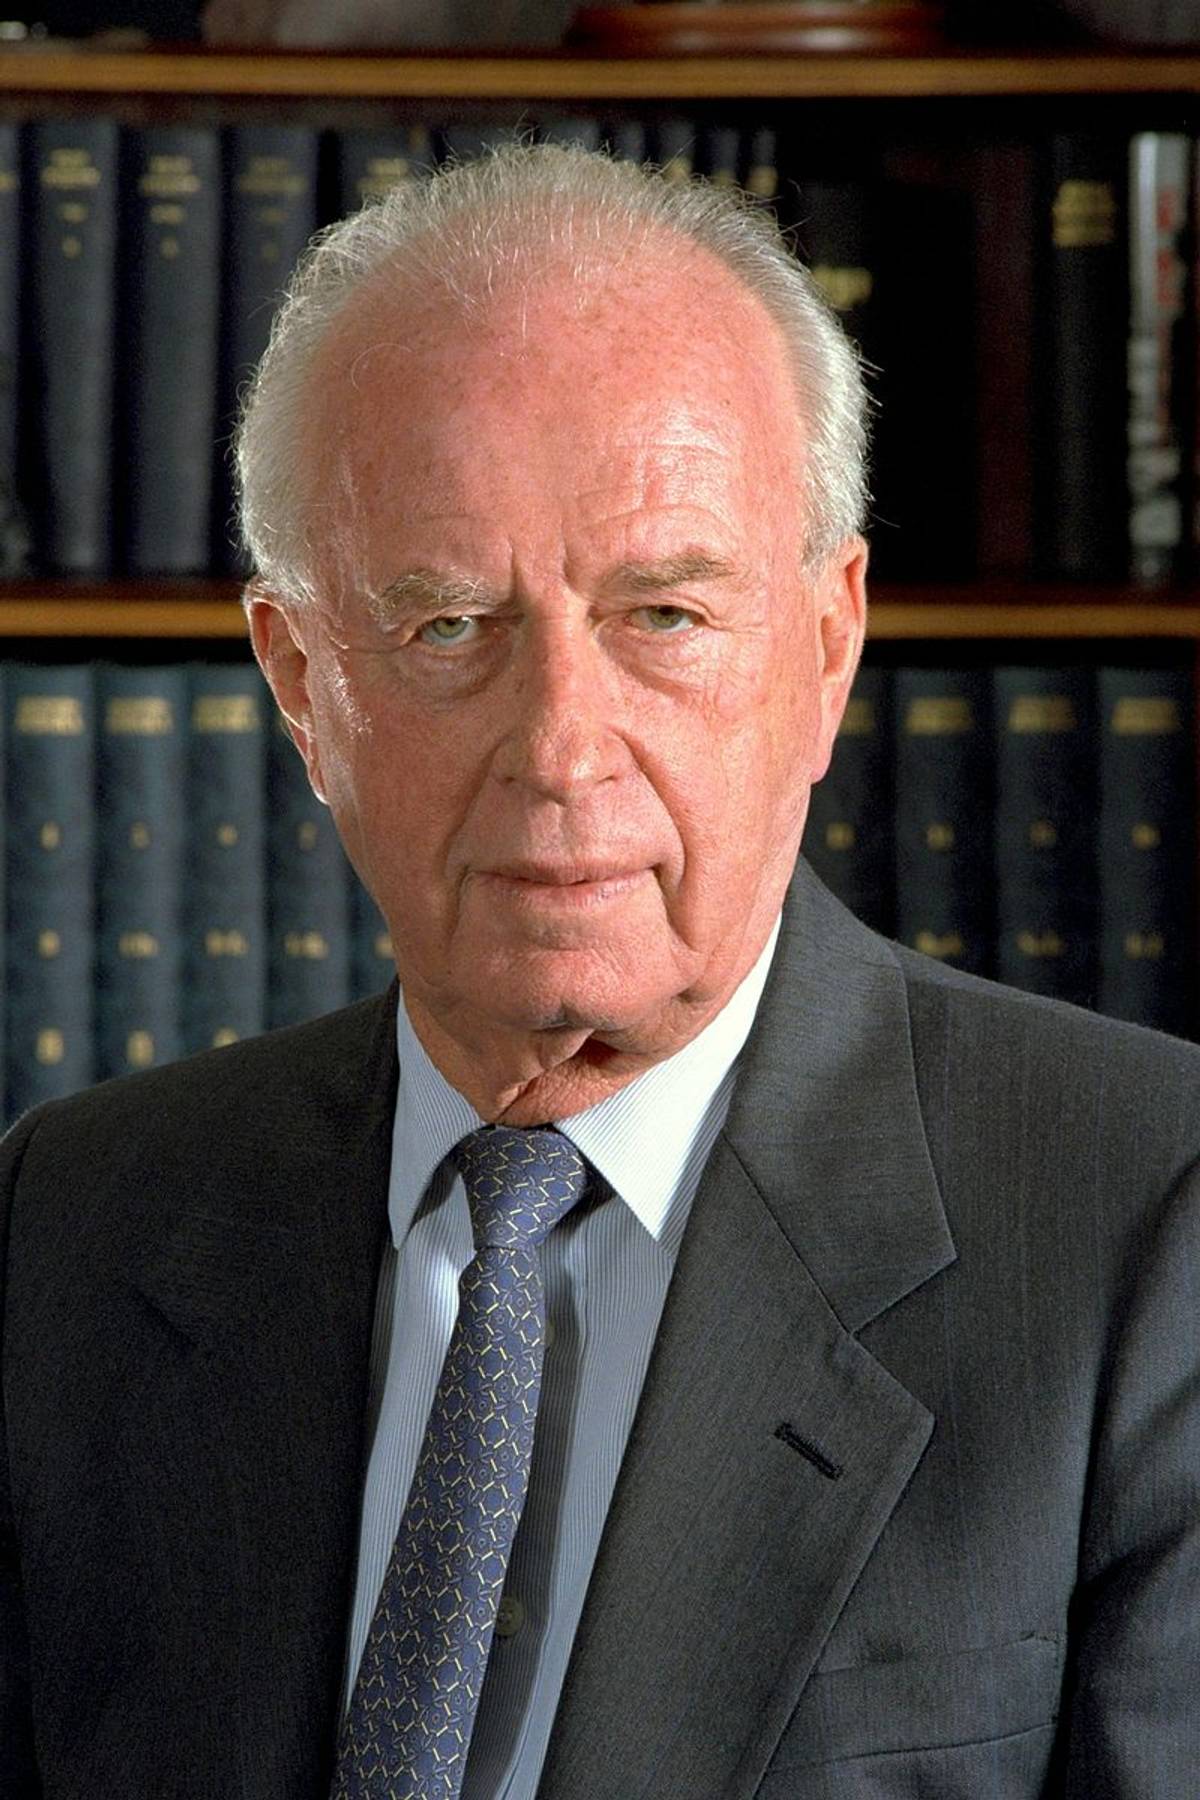 Yitzhak Rabin serving his first term as Prime Minister, 1974-77. (Wikimedia)